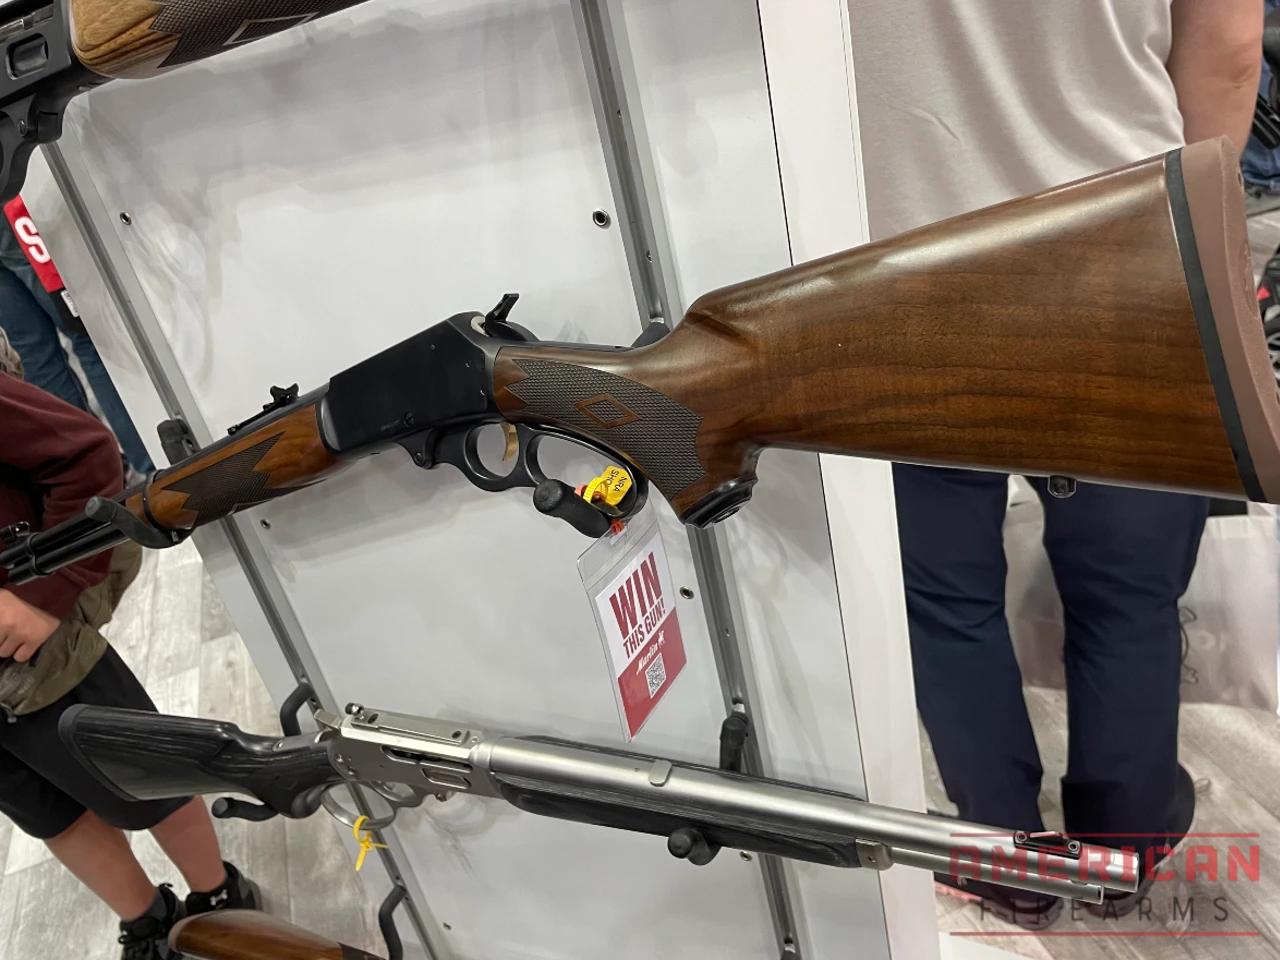 The Ruger reboot of the old Marlin 336 looks great, probably better than vintage 336s floating around, but will run $1,200, suggested.